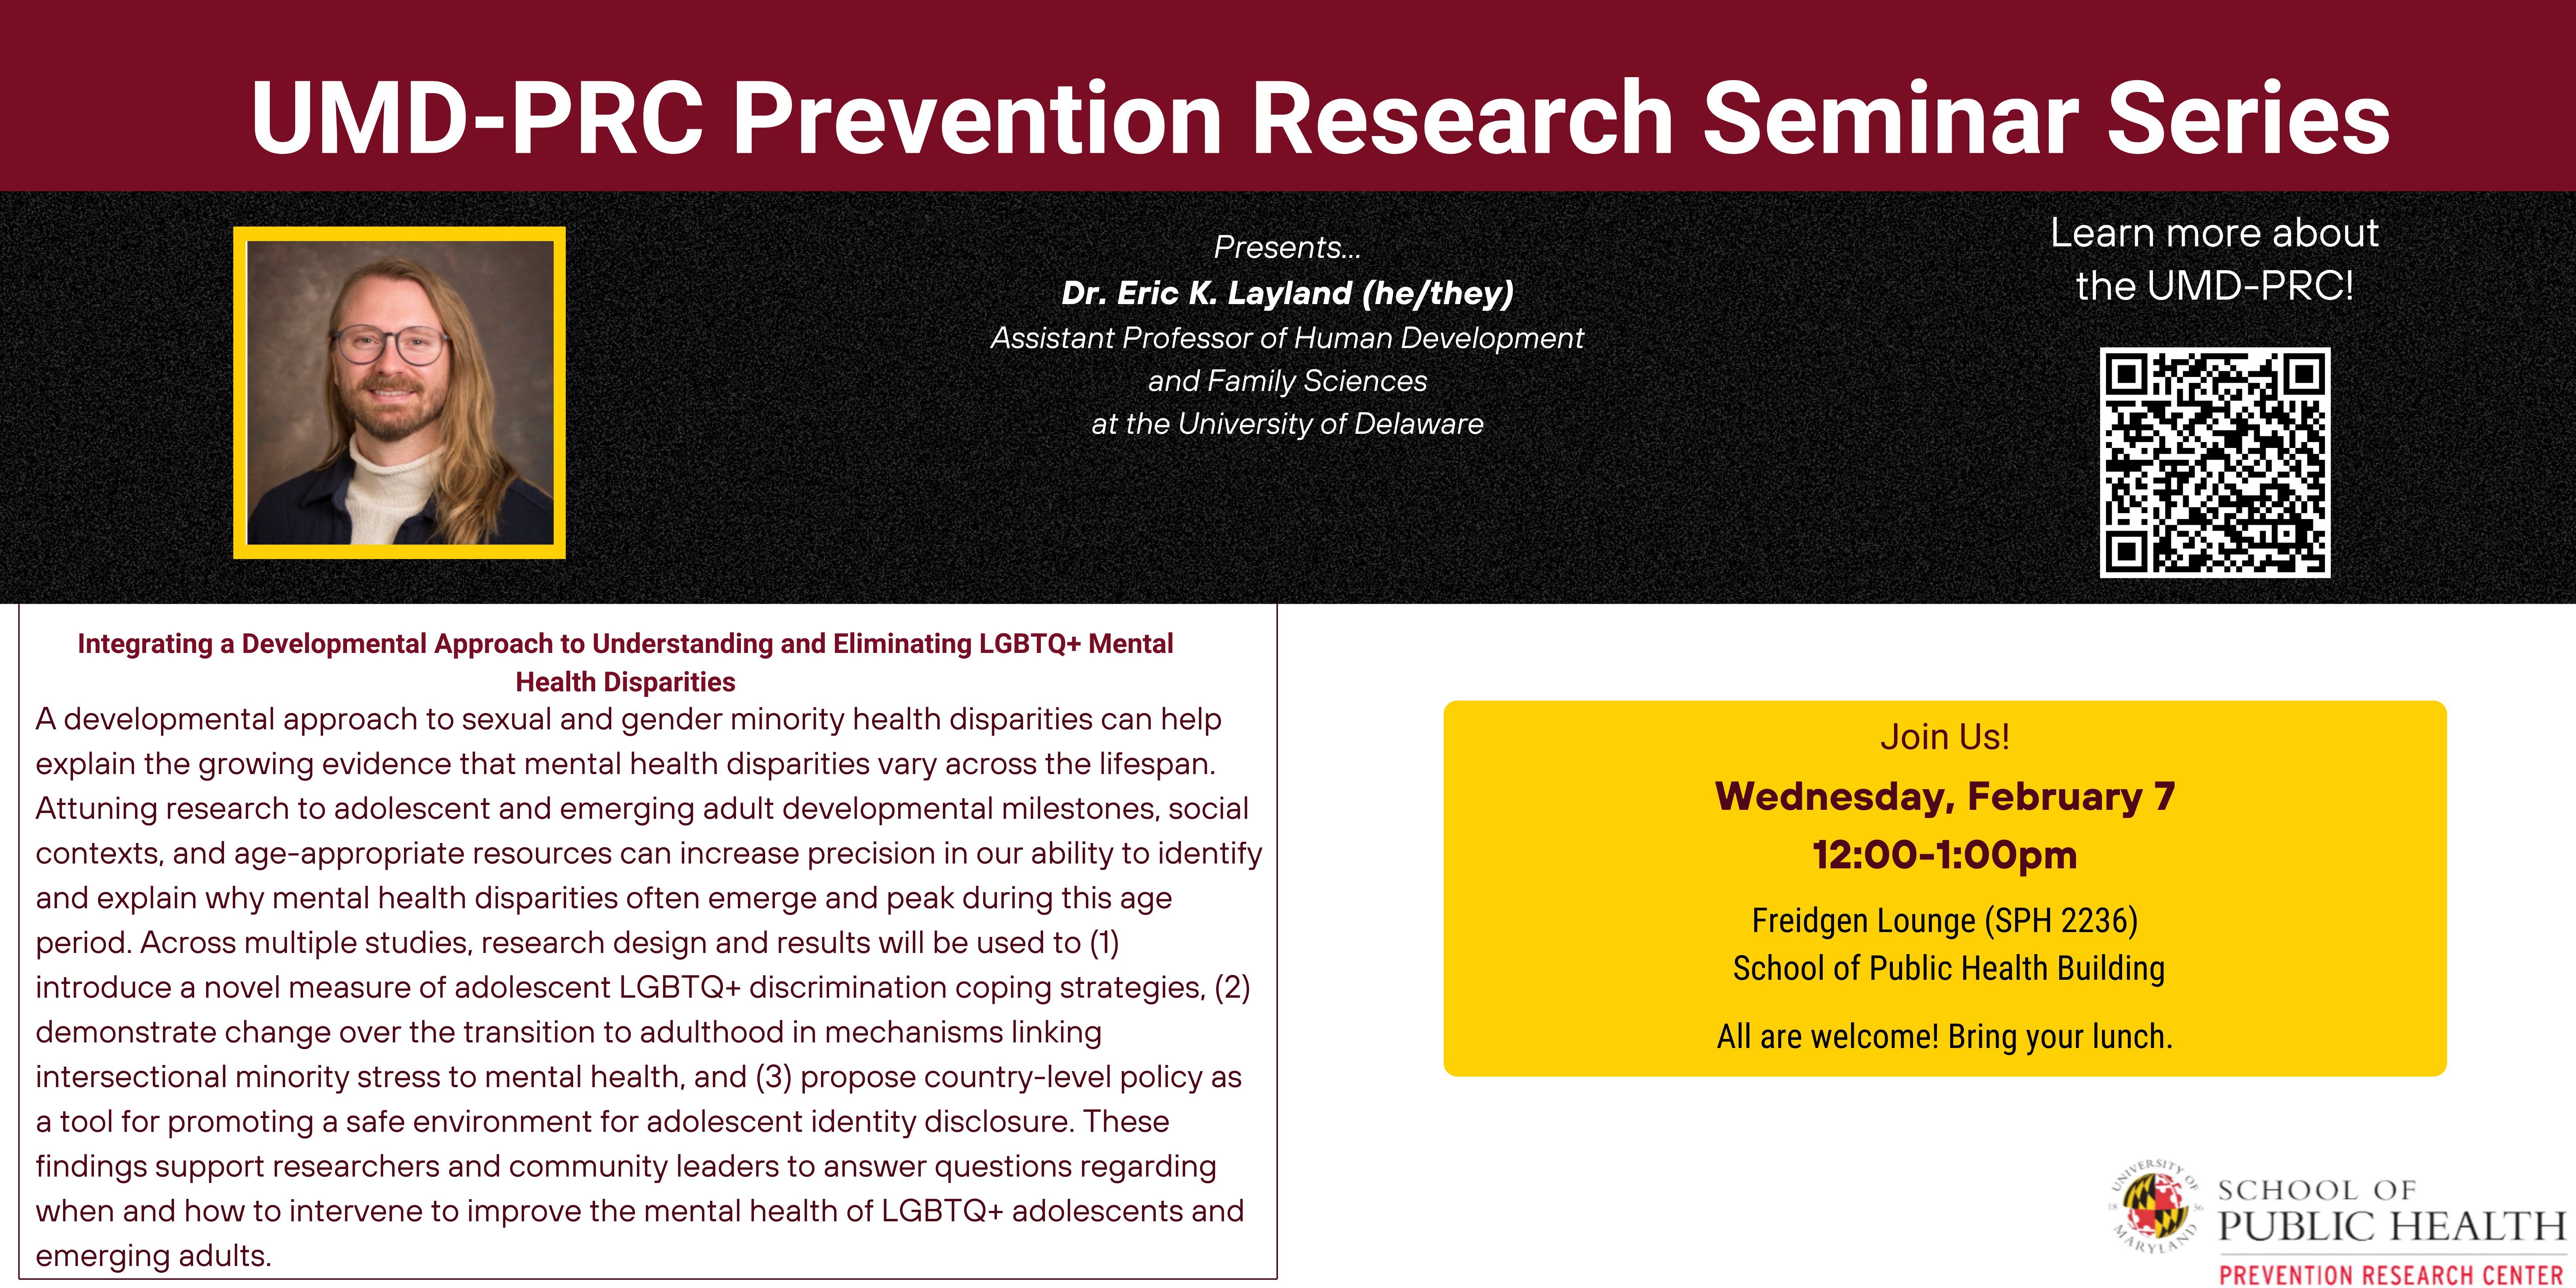 UMD-PRC Prevention Research Seminar Series. Speaker: Dr. Eric K. Layland. Pronouns: he/they. Title of talk: Integrating a Developmental Approach to Understanding and Eliminating LGBTQ+ Mental Health Disparities. Time and place: Wednesday, February 7th in the School of Public Health Building in the Freidgen Lounge from 12:00 to 1:00 pm. 